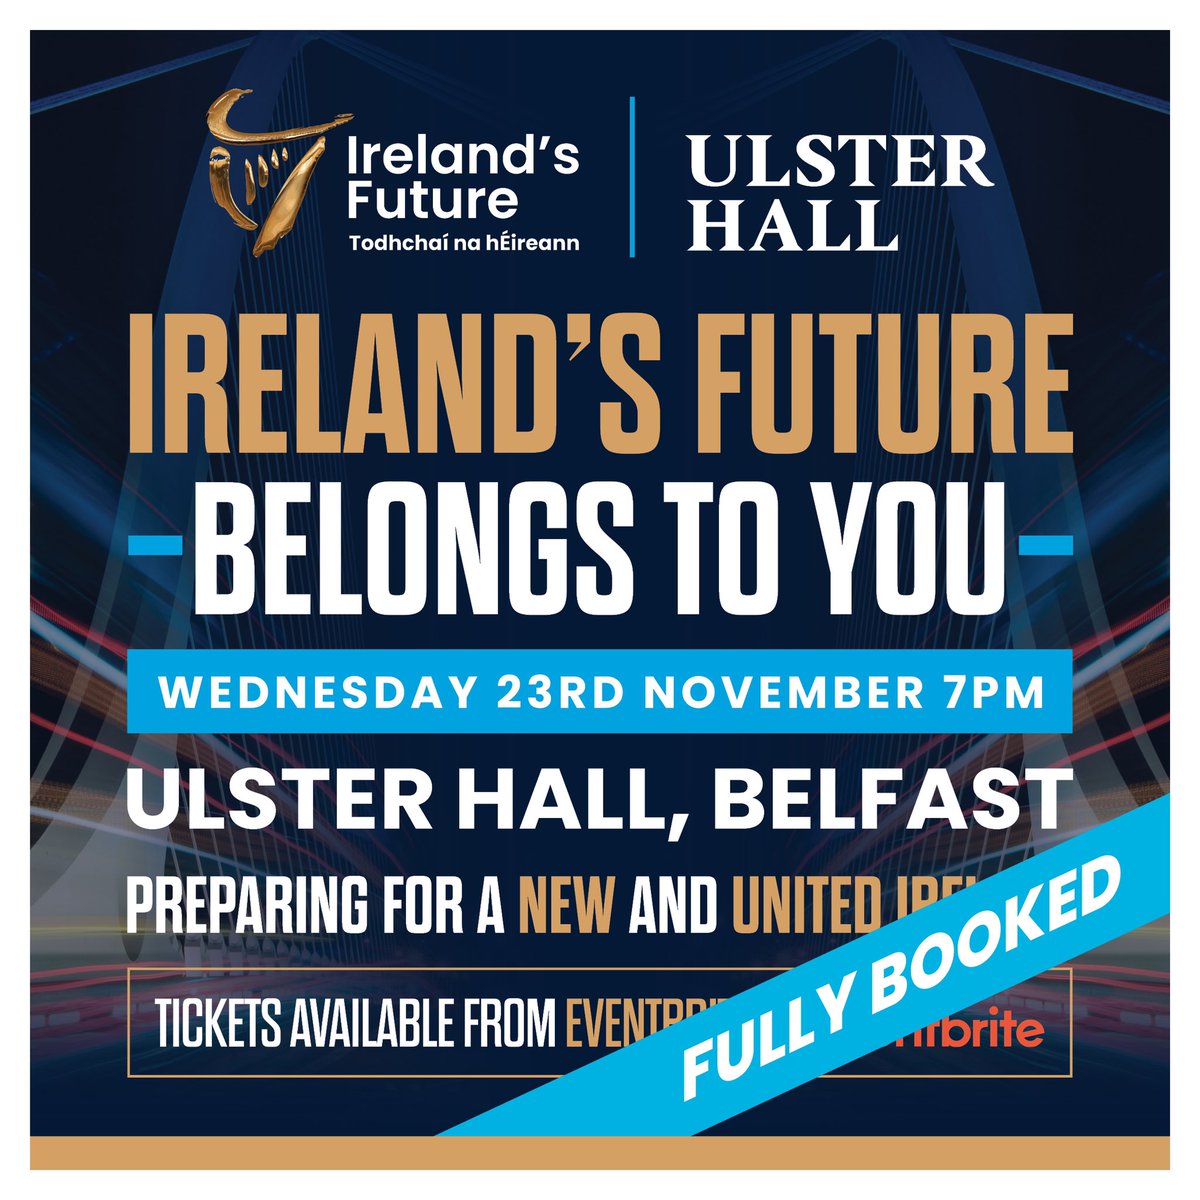 🚨Announcement 🎟Ireland’s Future - Belongs To You in the Ulster Hall on 23 Nov is now fully booked 🗣Tickets have all sold in less than a week 🗓There is still over a month until the event takes place 🗳The appetite for constitutional change in Ireland has never been greater